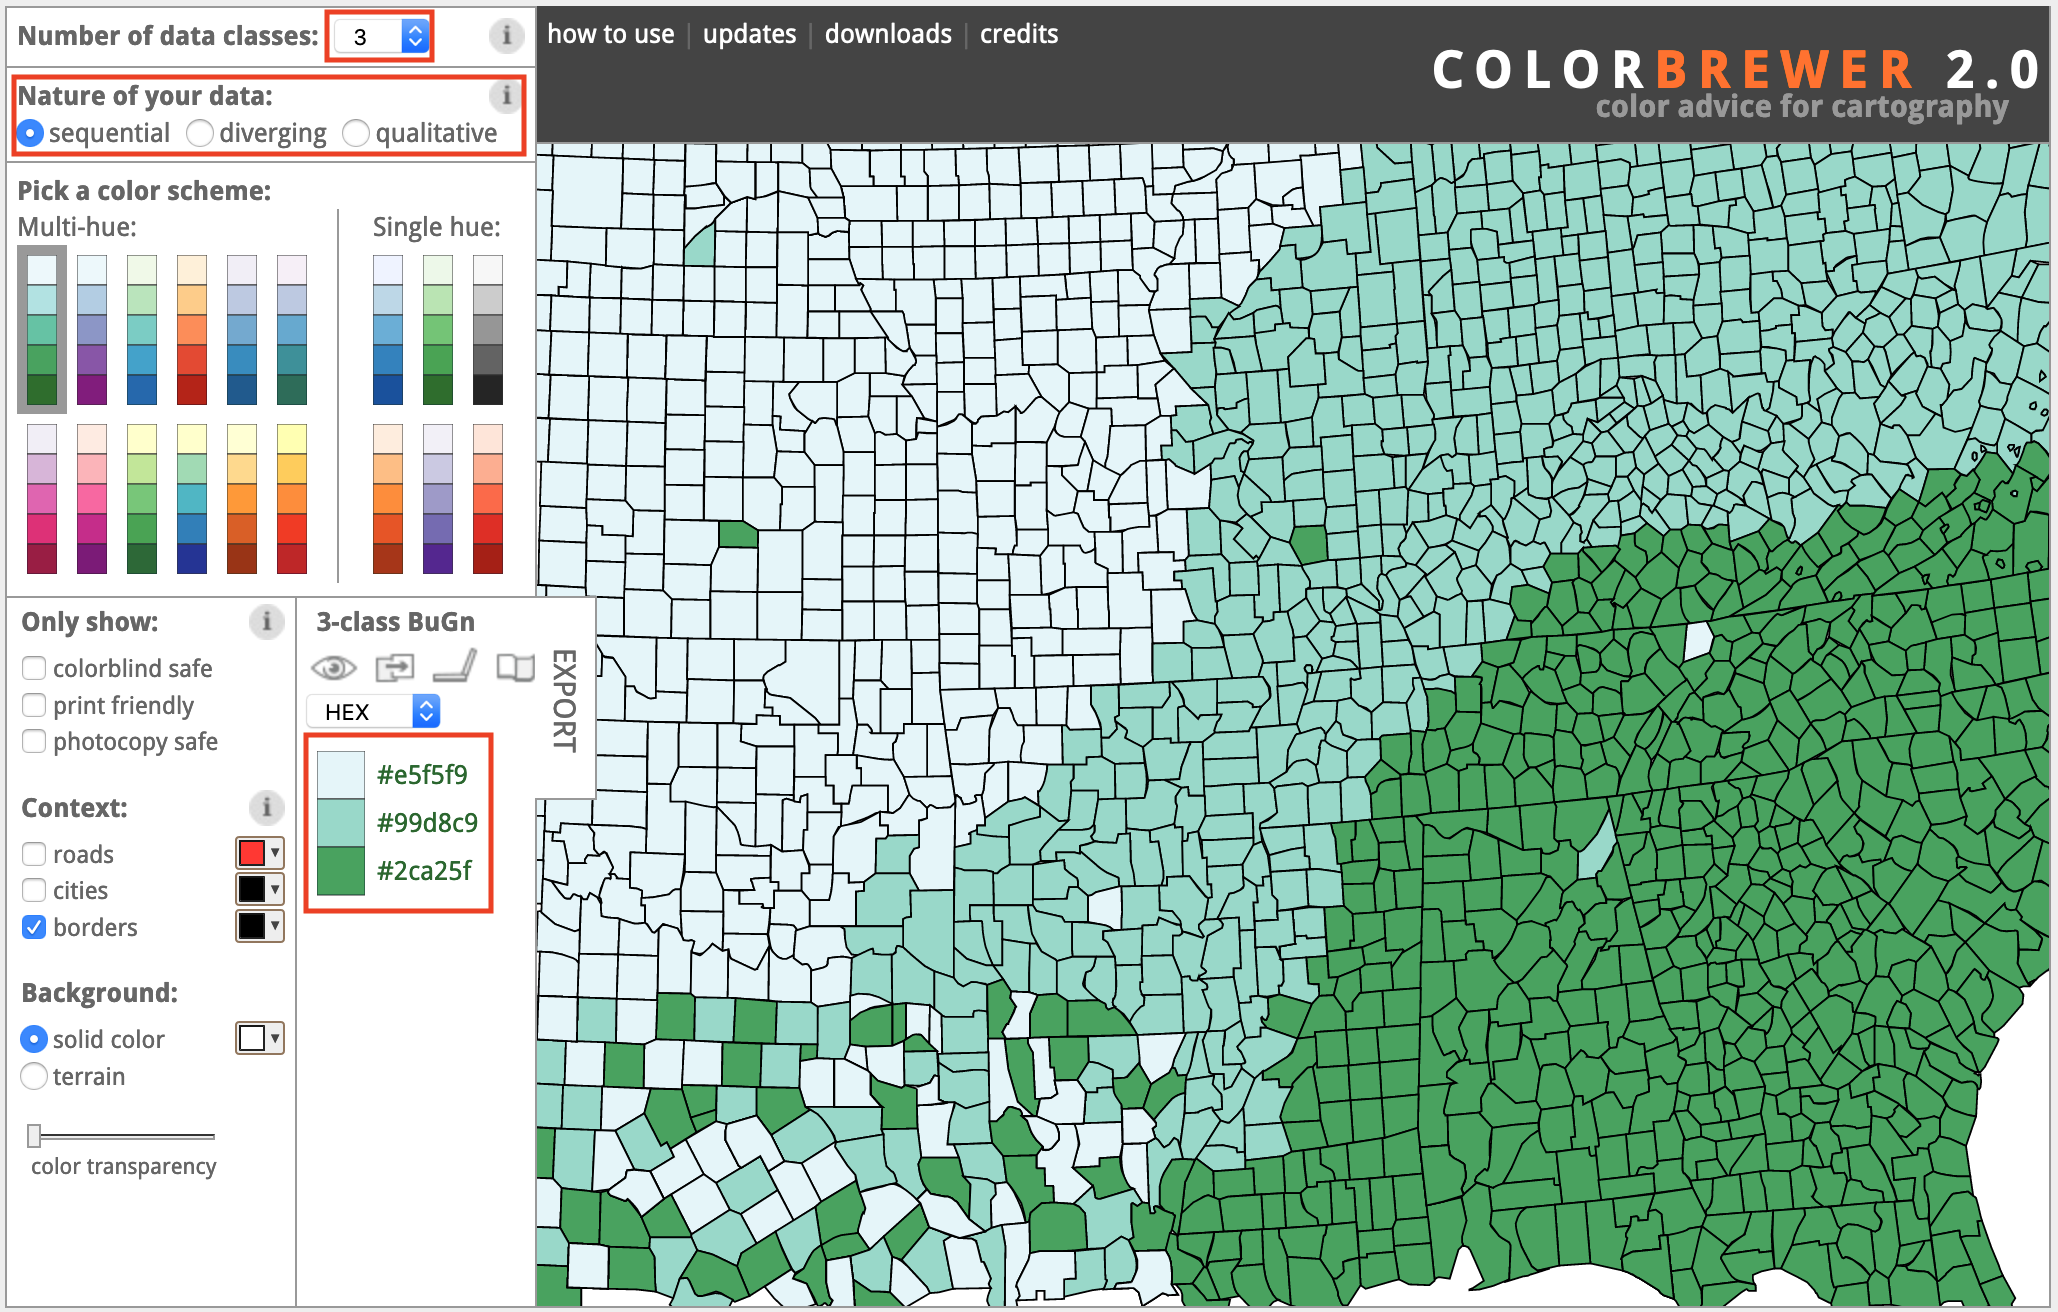 The ColorBrewer design assistant interface: data classes, type of color scheme, and recommended color codes.